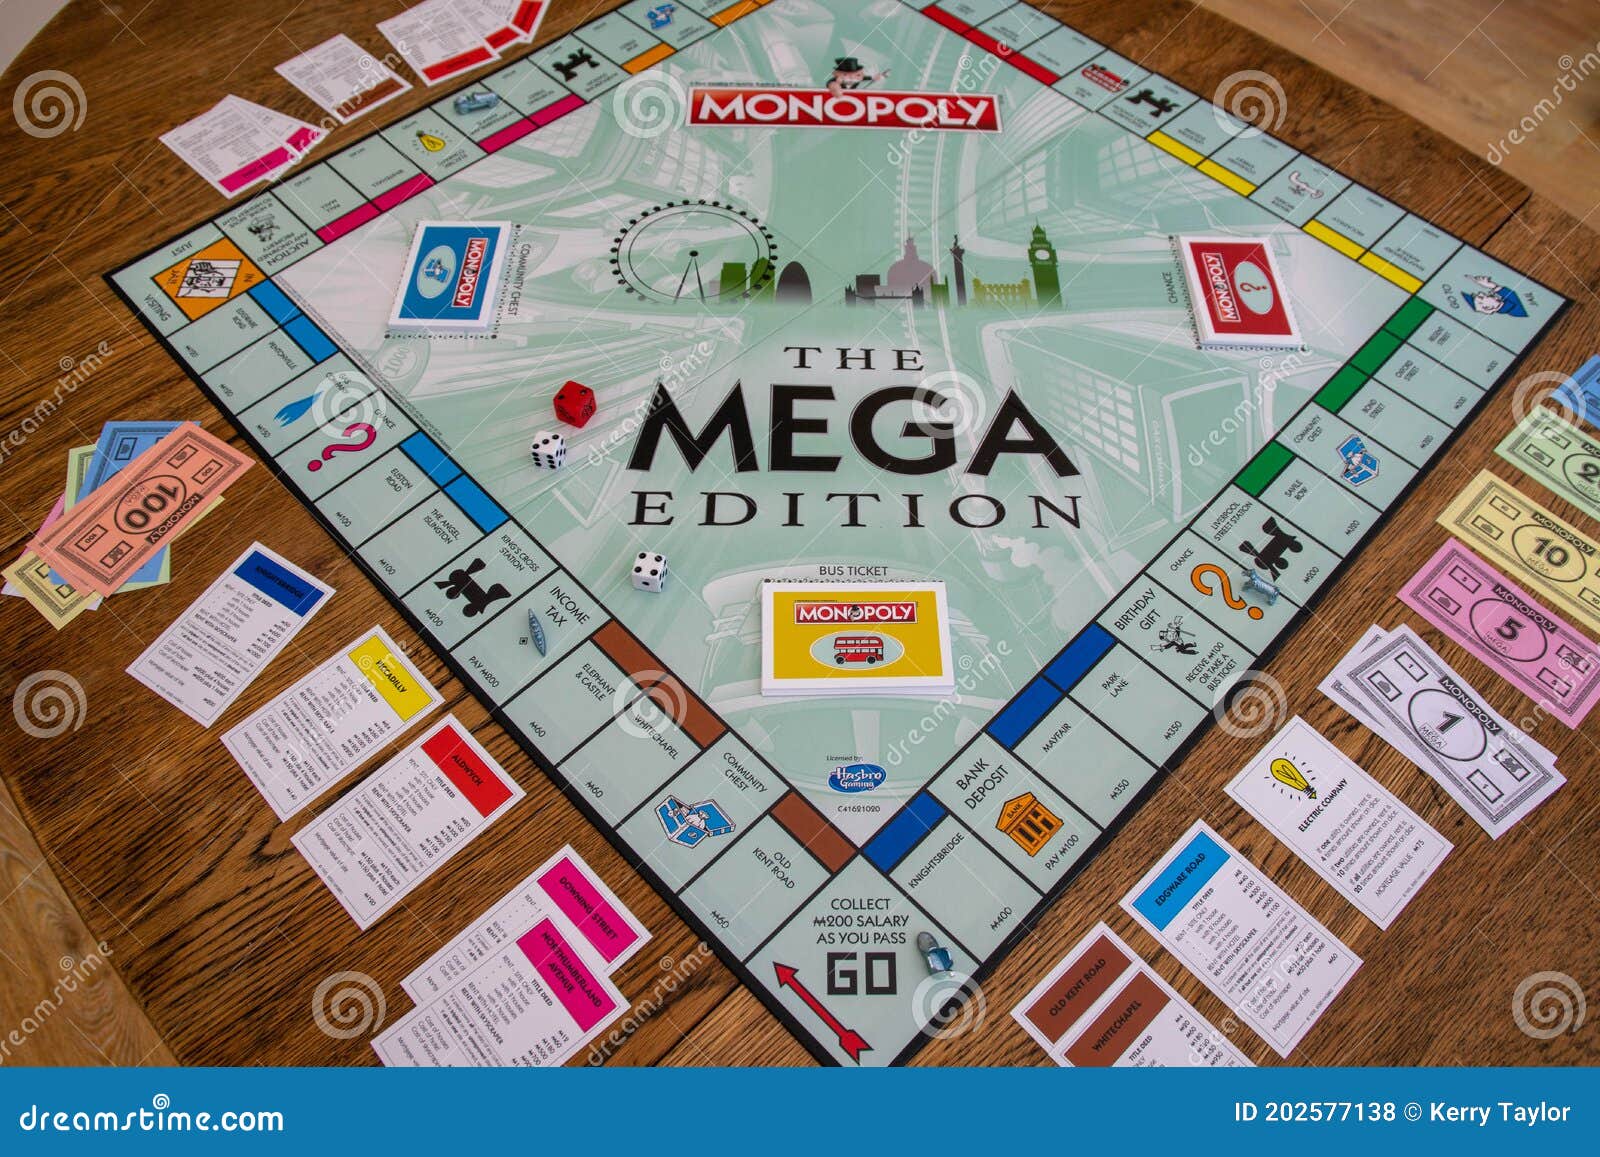 Newley Released Mega Edition Monopoly. New Twist on Classic Fast-dealing  Property Trading Board Game Hasbro Games Editorial Stock Photo - Image of  edition, chest: 202577138